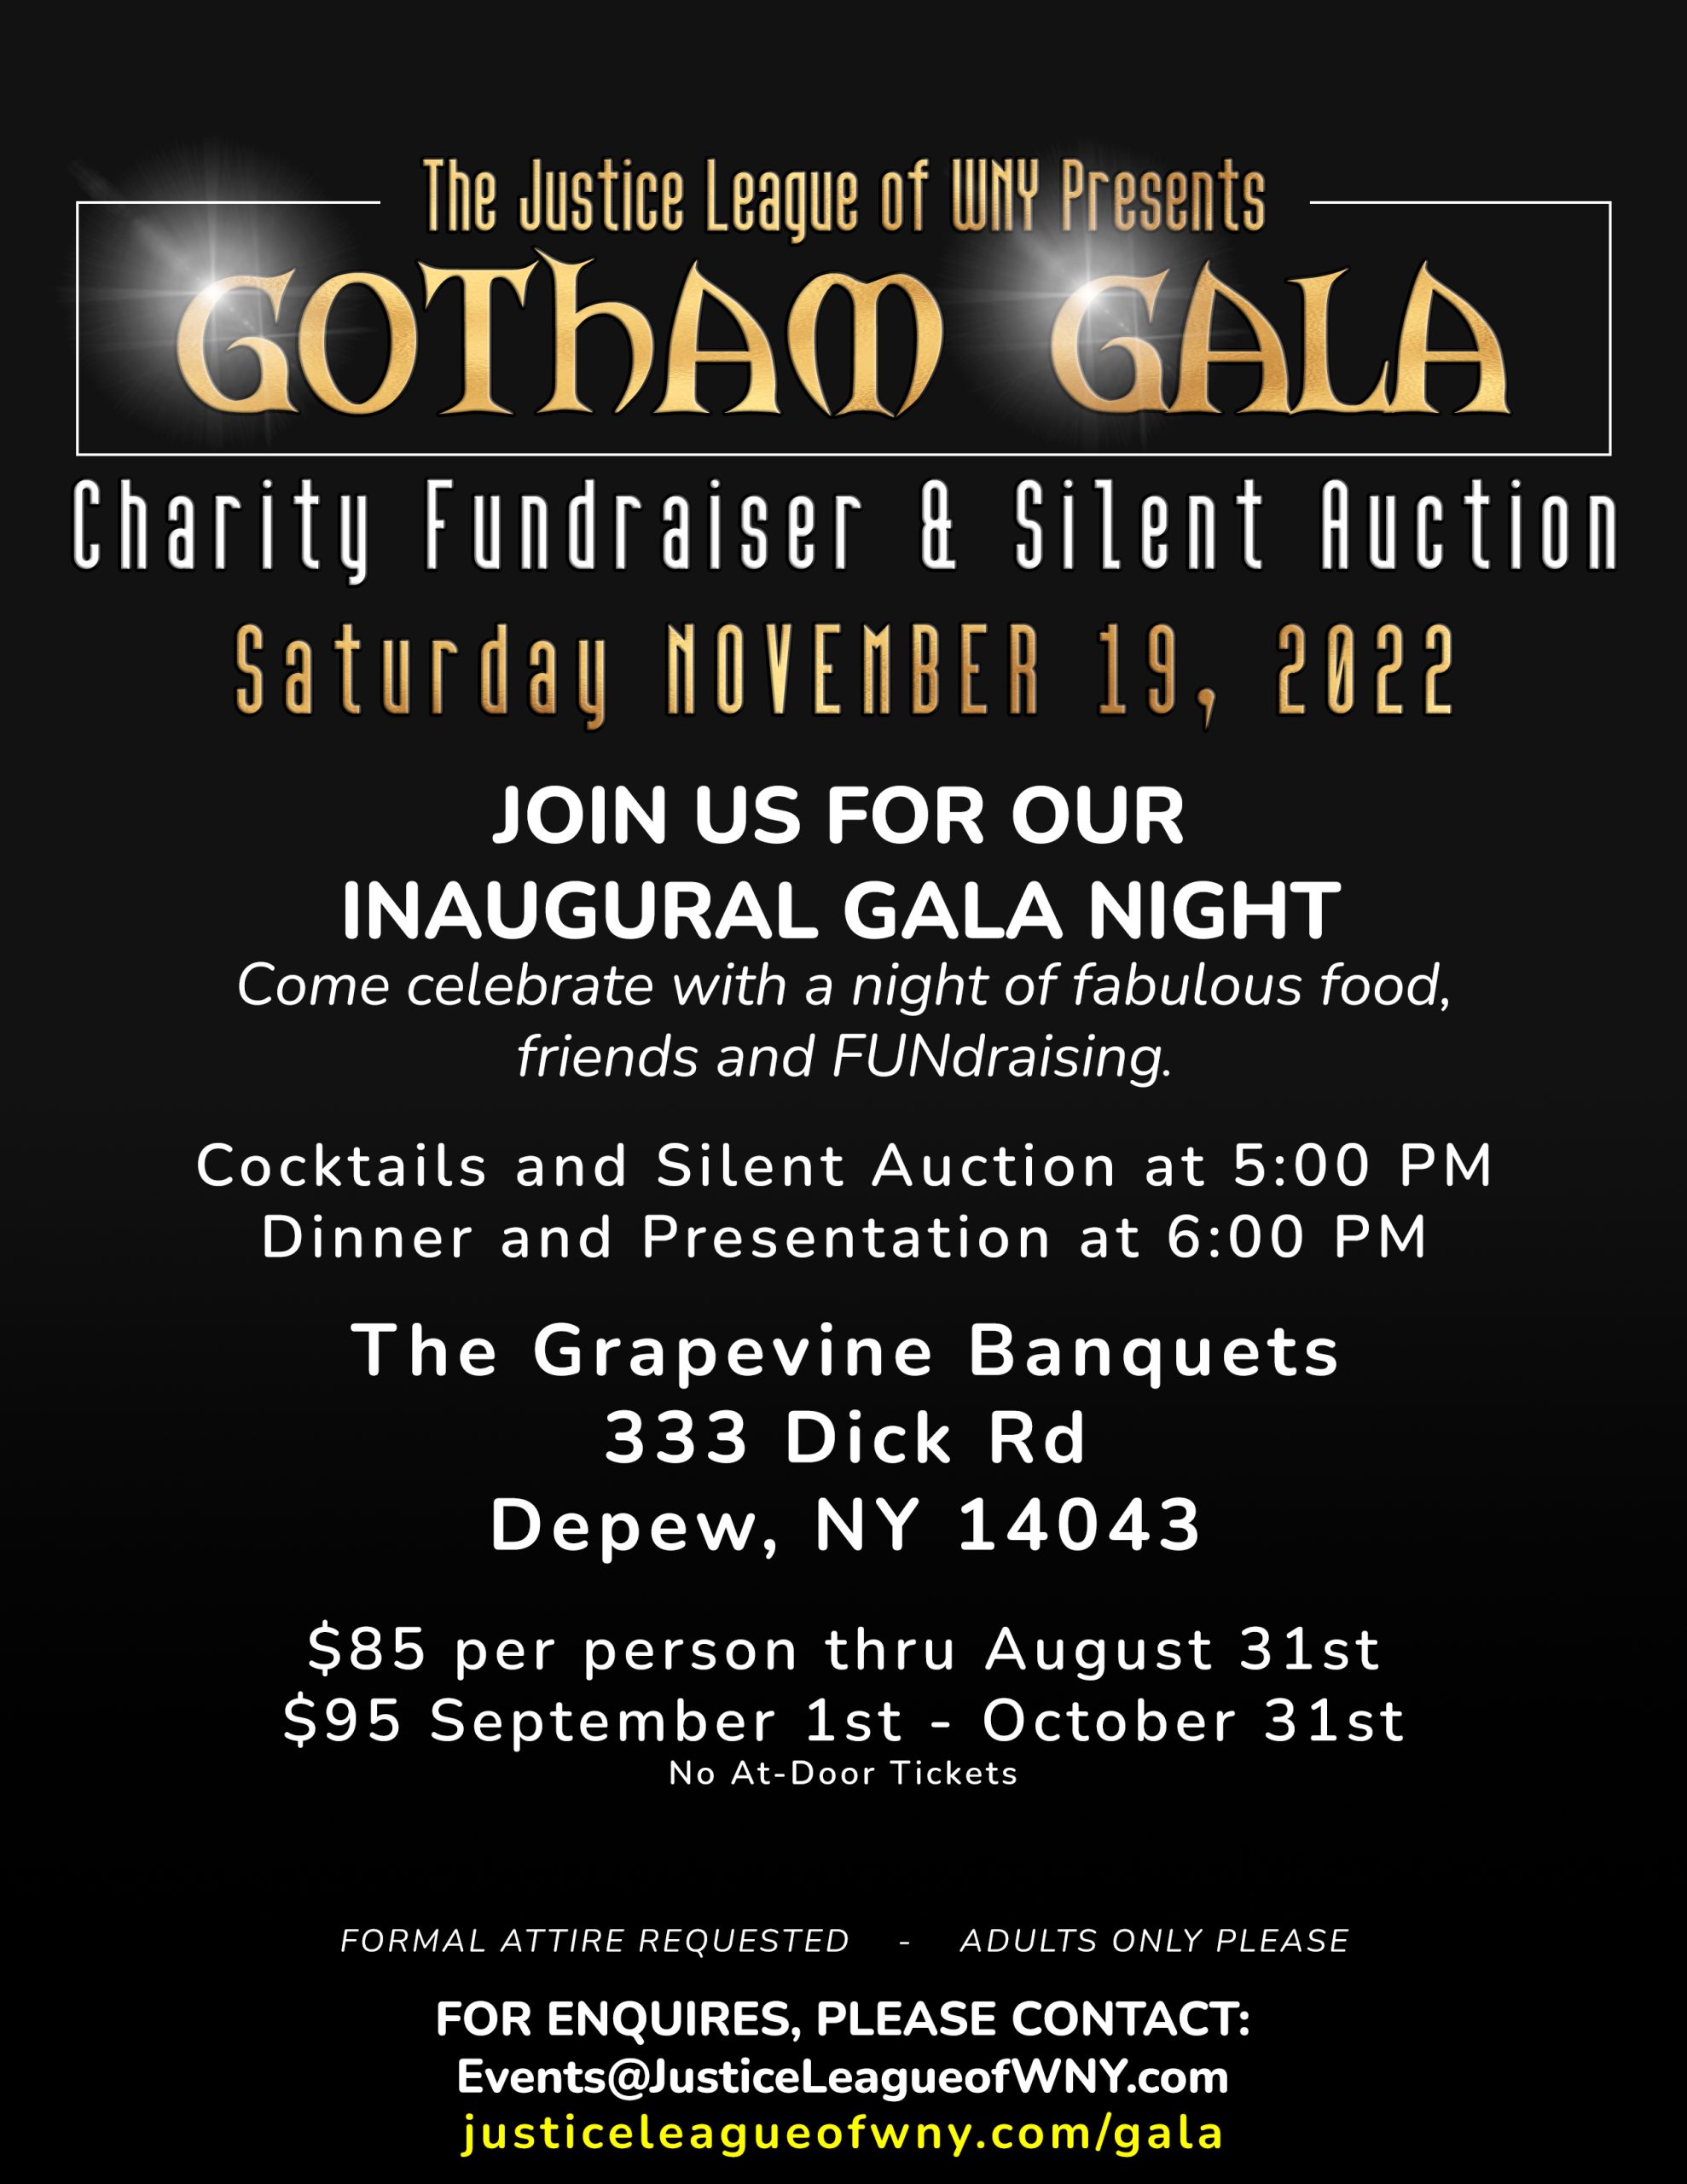 Charity Fundraiser Join us on November 19, 2022 at 5:00PM at The Grapevine Banquets located at 333 Dick Road, Depew, NY 14043. Cocktails start at 5:00PM with a silent auction, raffle items, and dinner to follow. 